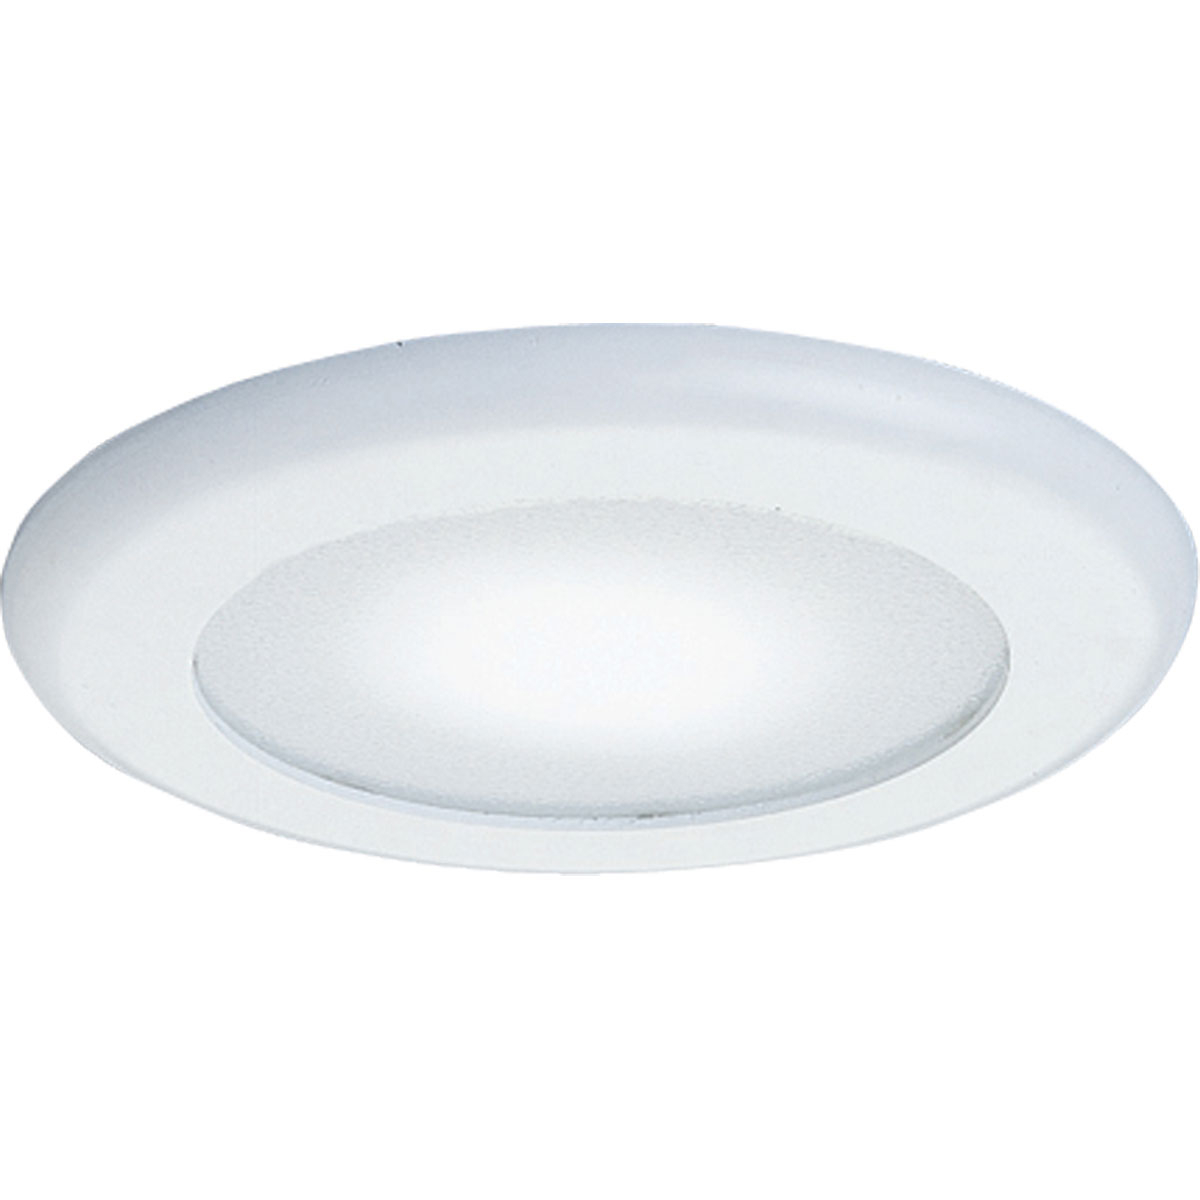 6 in Flat Albalite Trim with Reflector in a bright white finish with white glass and non-metallic flange. Wet location listed.